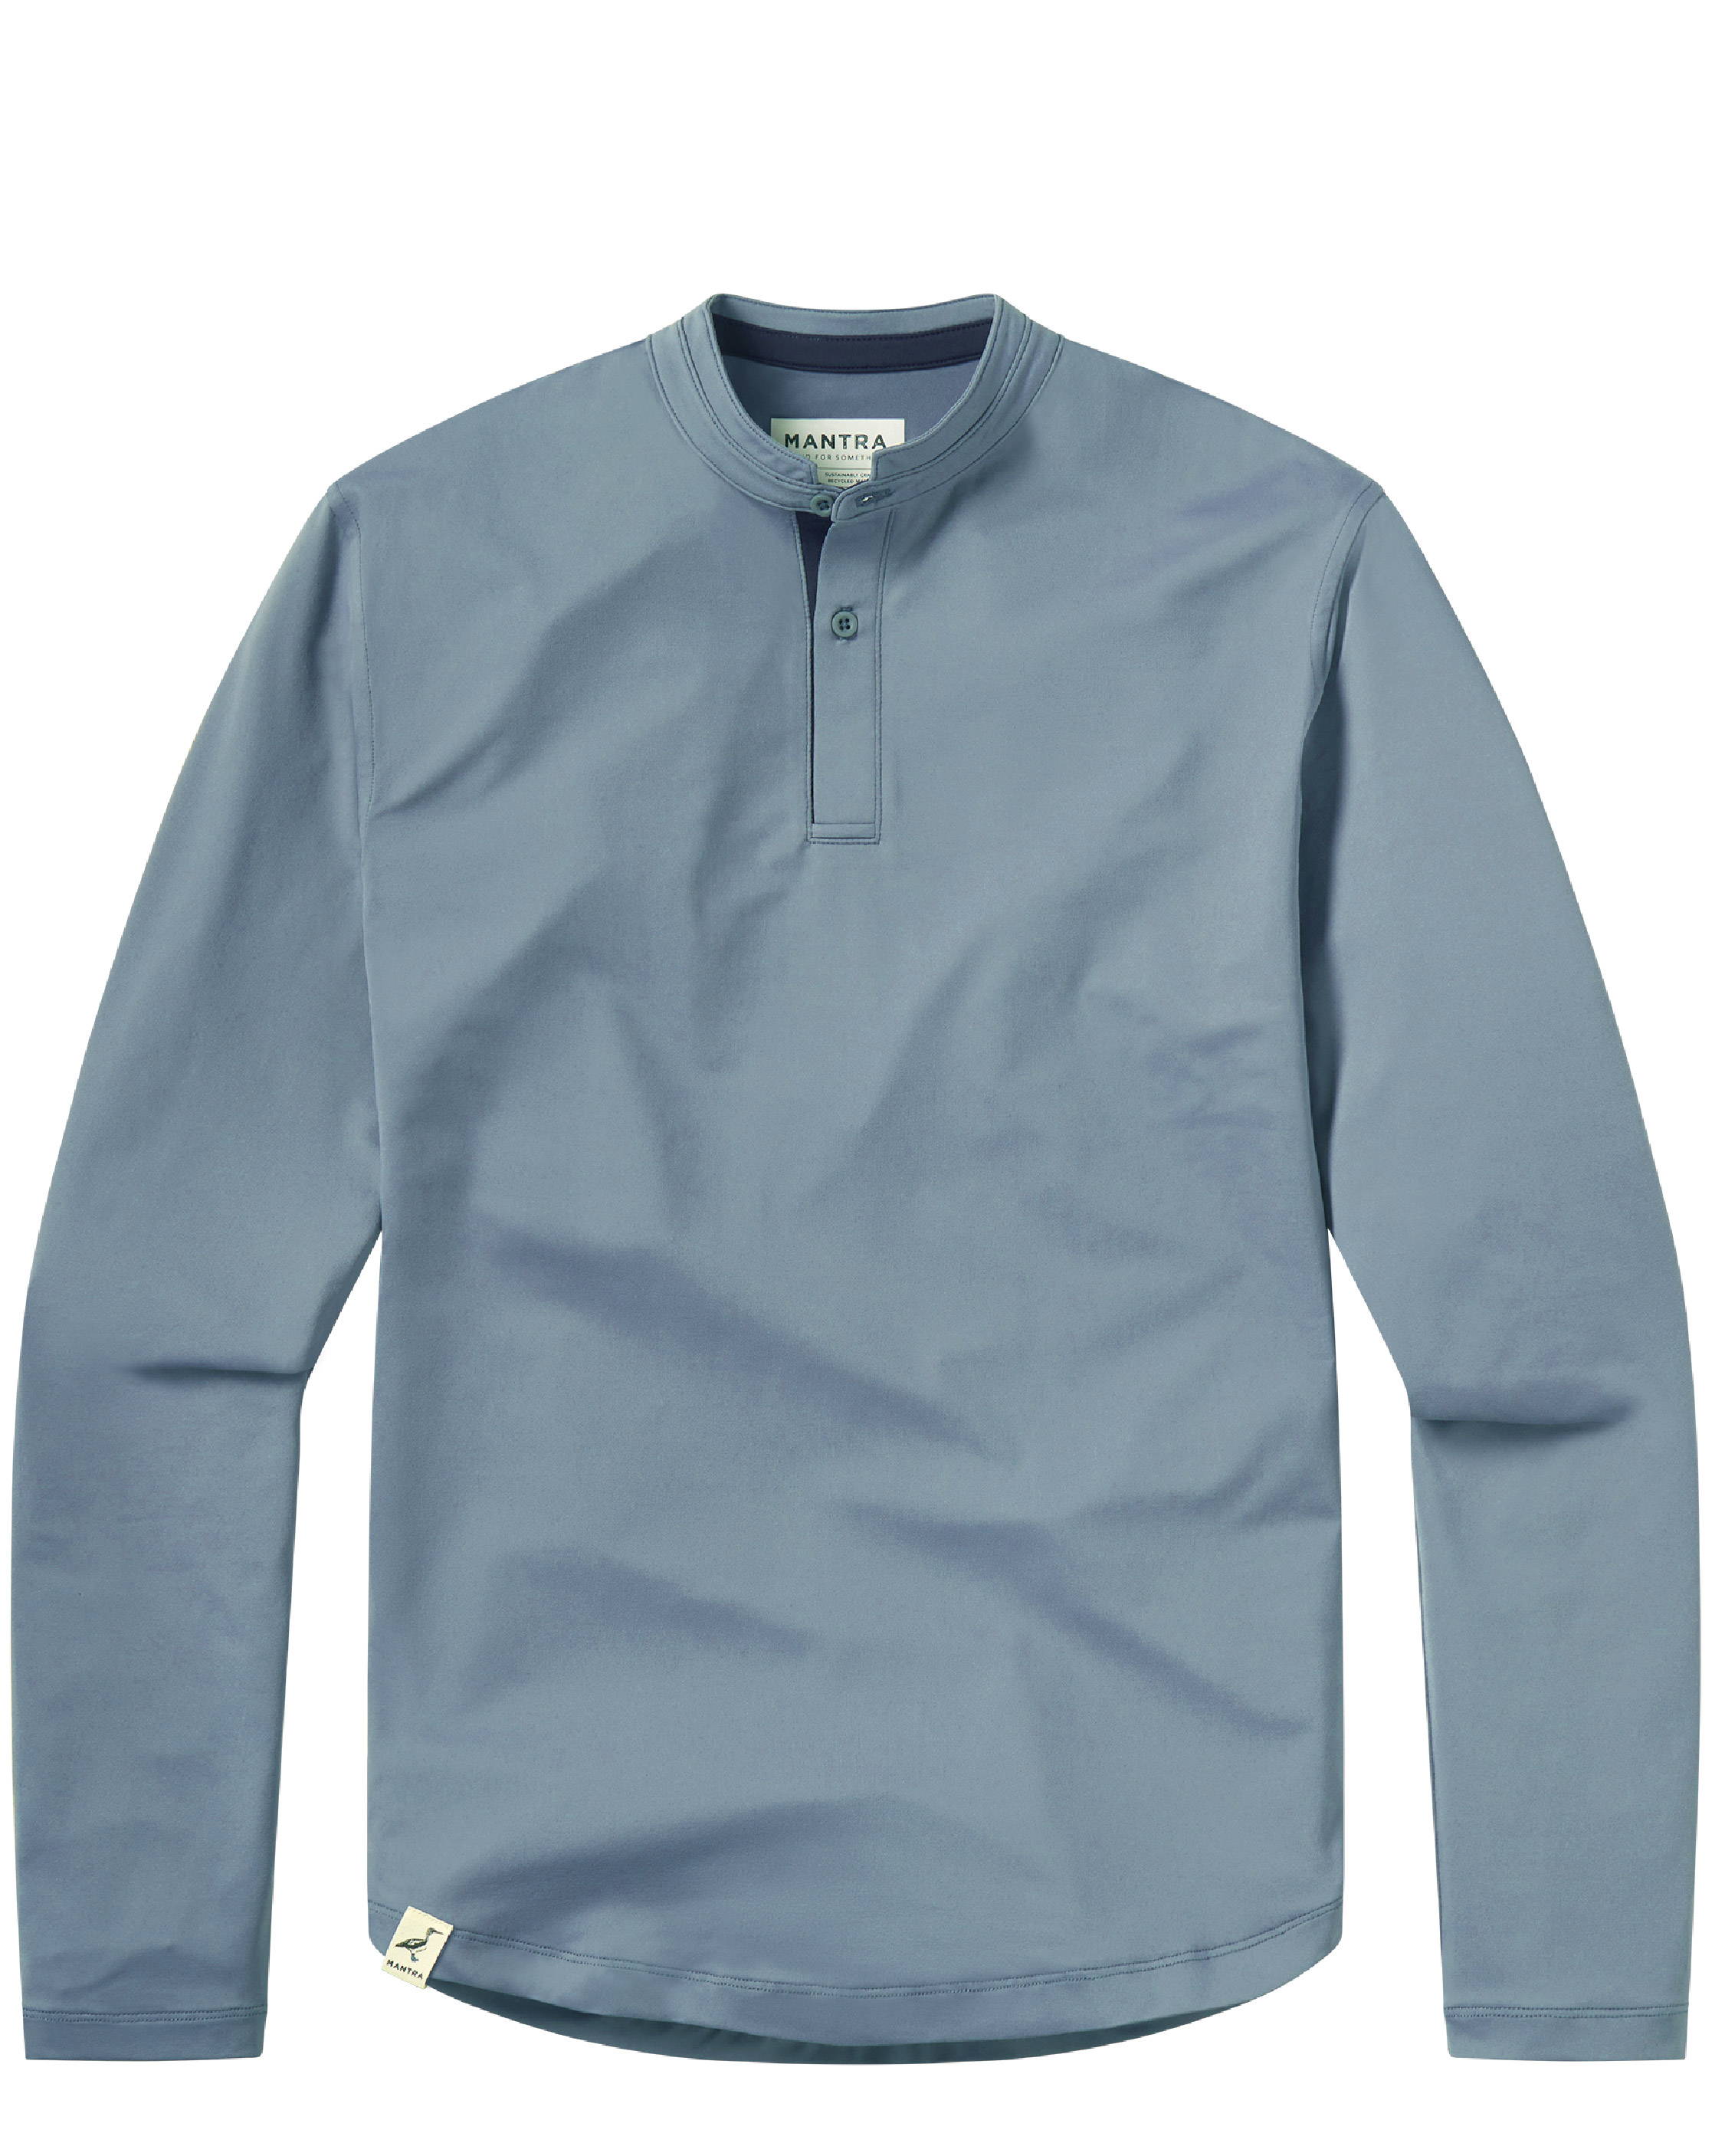 CATALYST POLO L/S - MANTRA COLLAR - SKY POND color selector